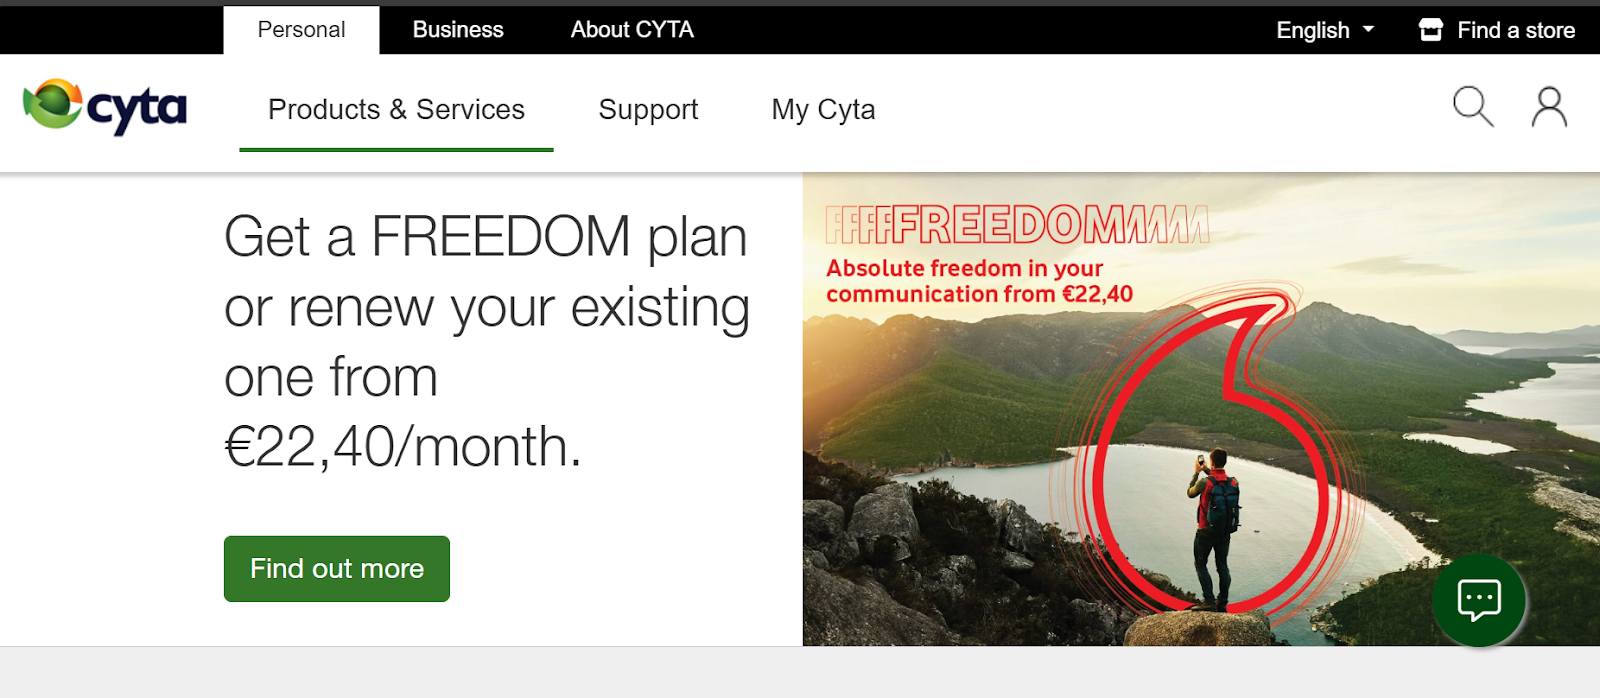 Cyta website snapshot highlighting the services it offers.